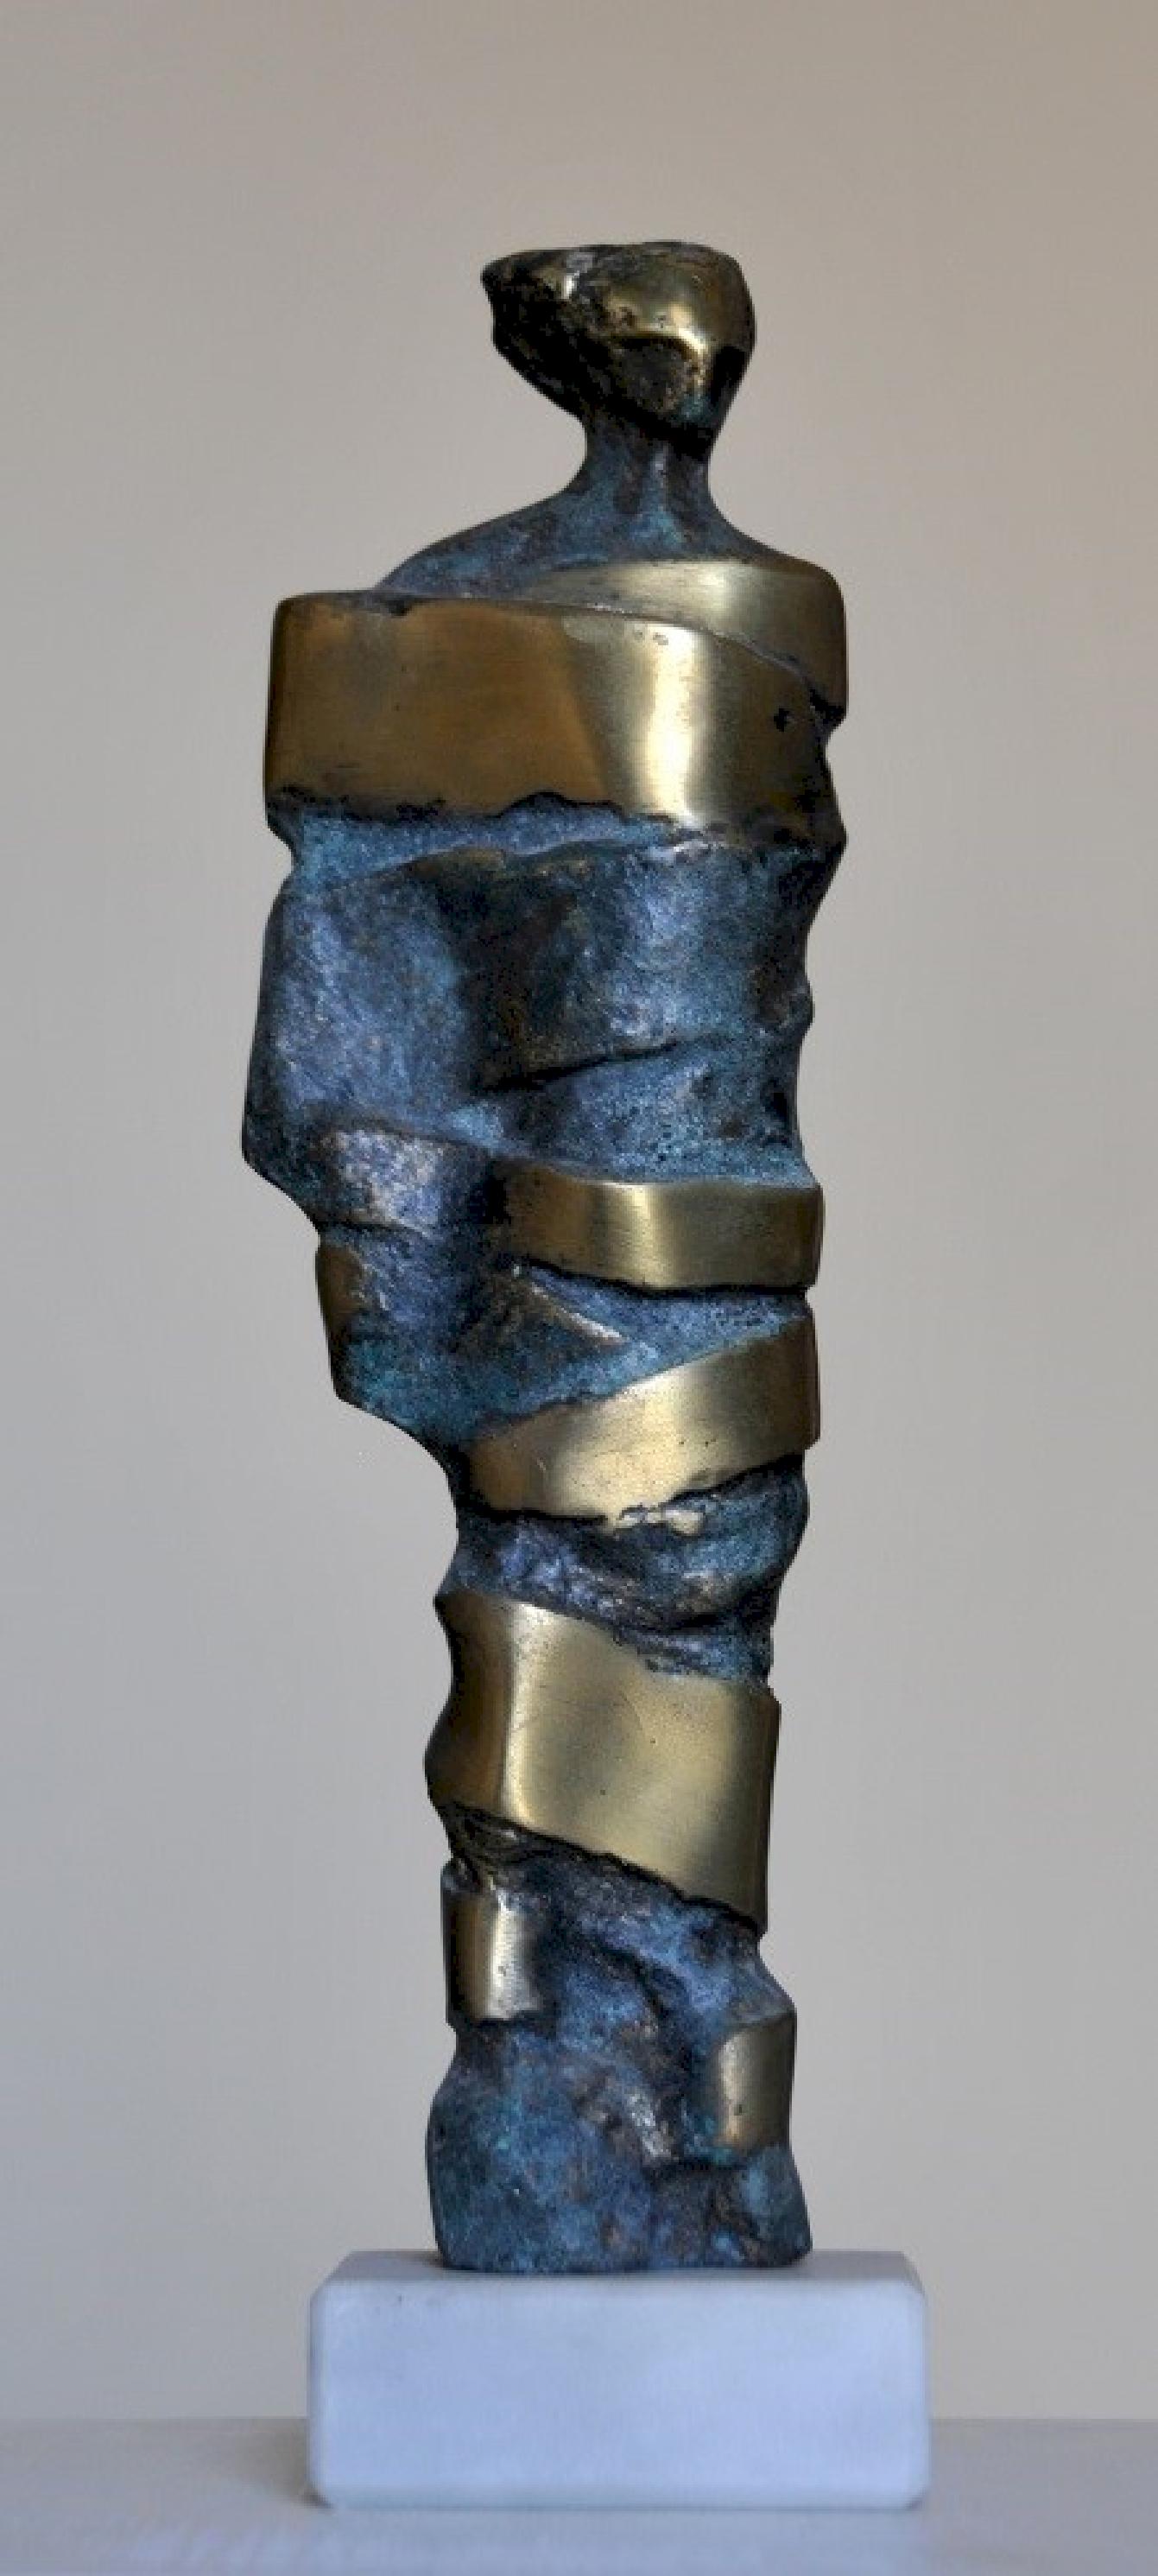 "Bound II" Bronze Sculpture 11" x 3" inch by Sarkis Tossonian	

Sarkis Tossoonian was born in Alexandria in 1953. He graduated from the Faculty of Fine Arts/Sculpture in 1979. He started exhibiting in individual and group exhibitions in Alexandria